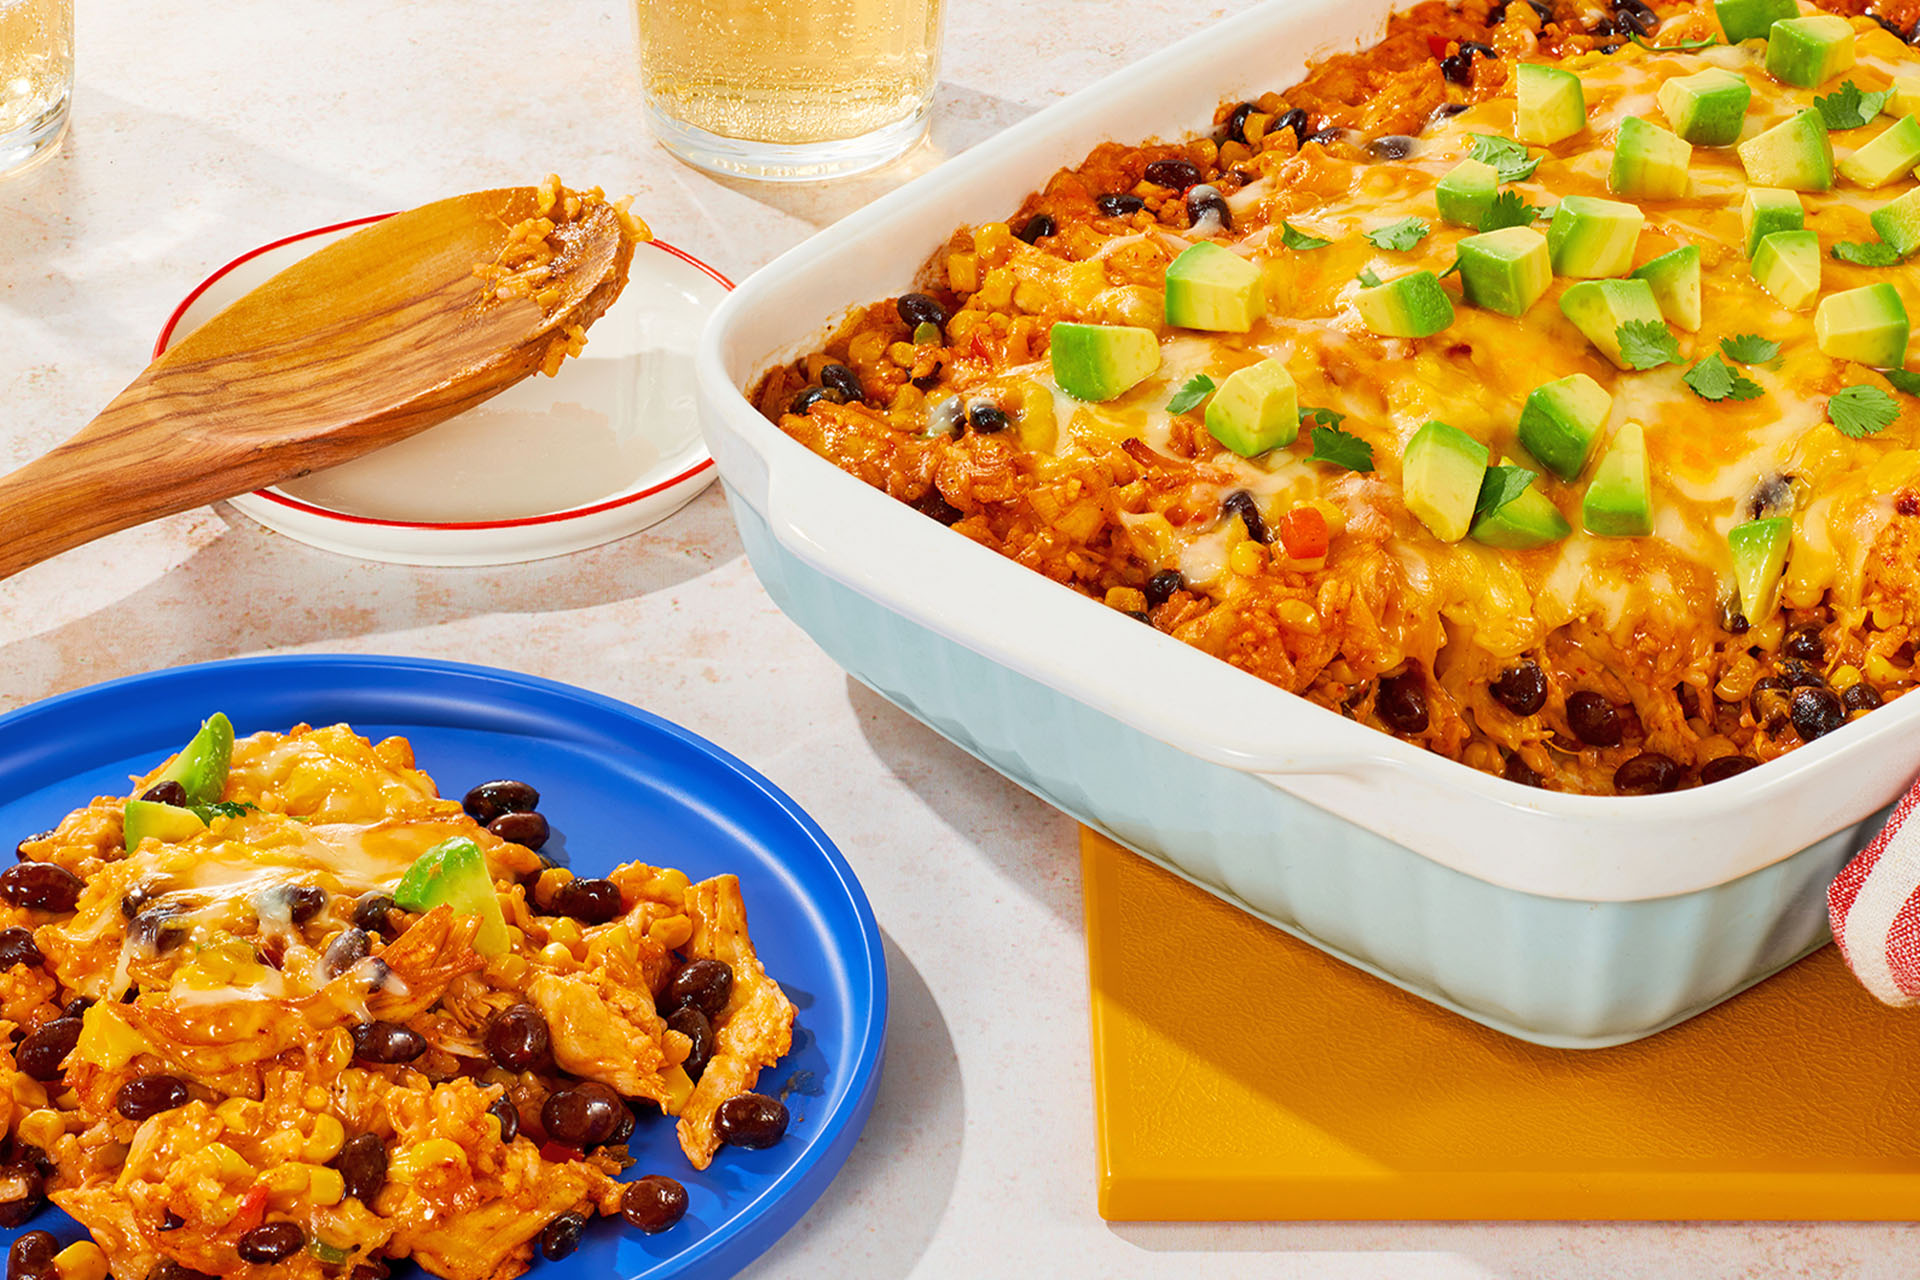 A casserole dish full of taco bake sitting next to a blue plate with a serving of the meal on it. 